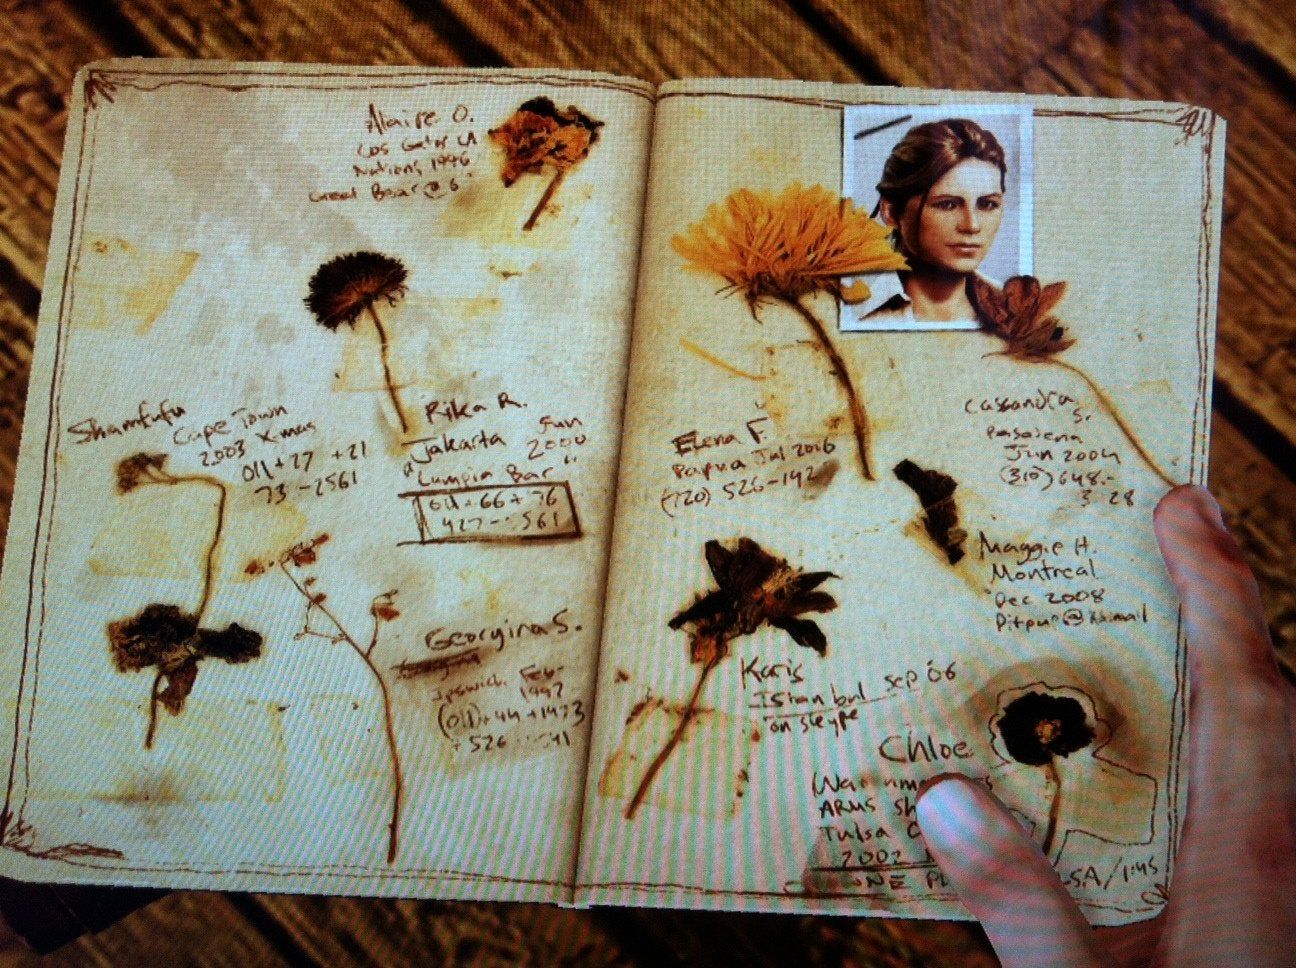 Uncharted 2 journal entry by Nathan Drake